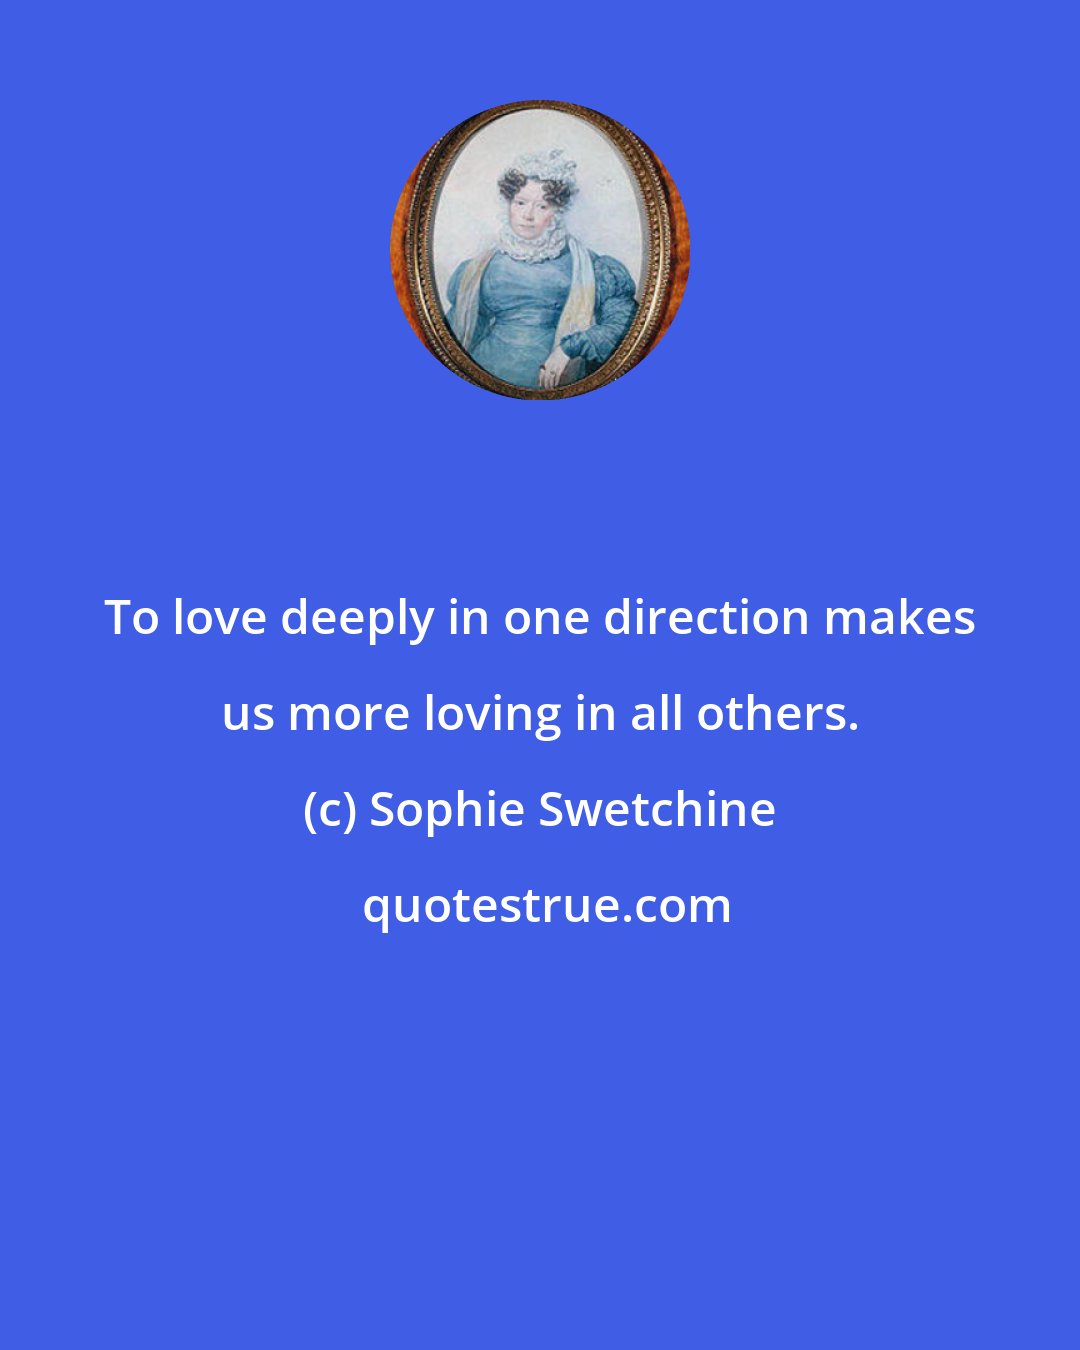 Sophie Swetchine: To love deeply in one direction makes us more loving in all others.